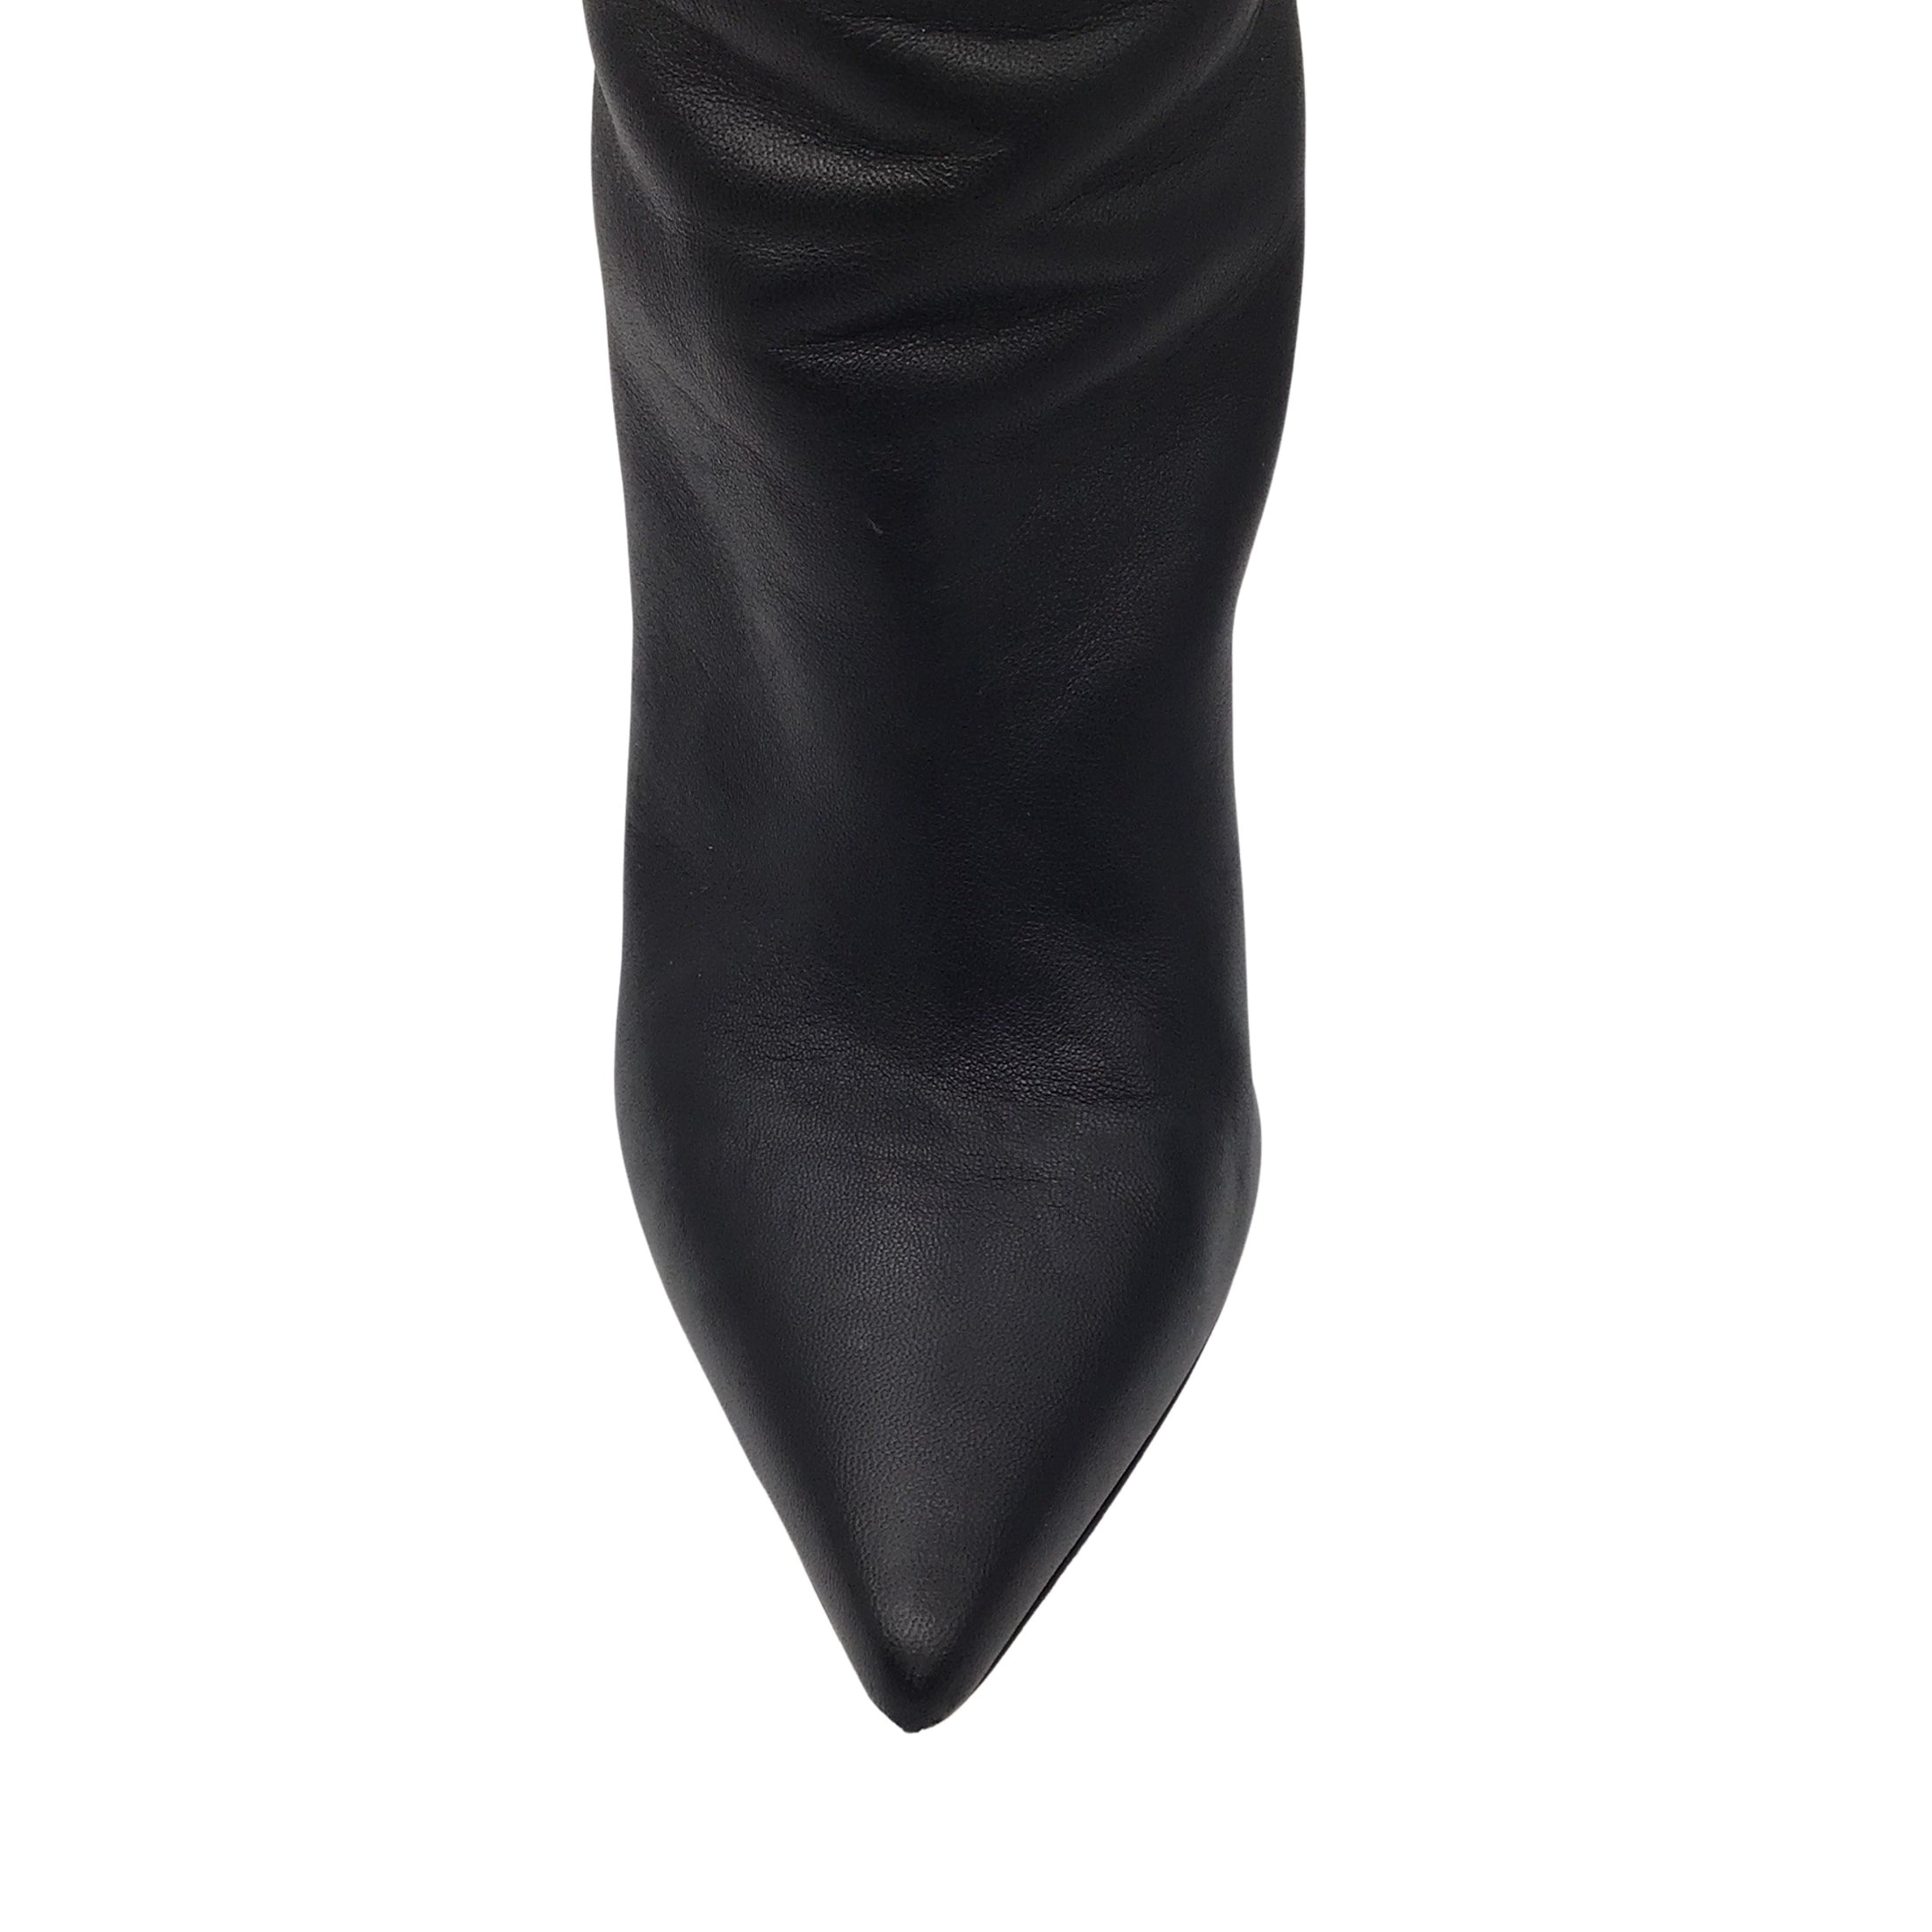 Tabitha Simmons Black Nappa Leather Icon 105 Knee-High Boots